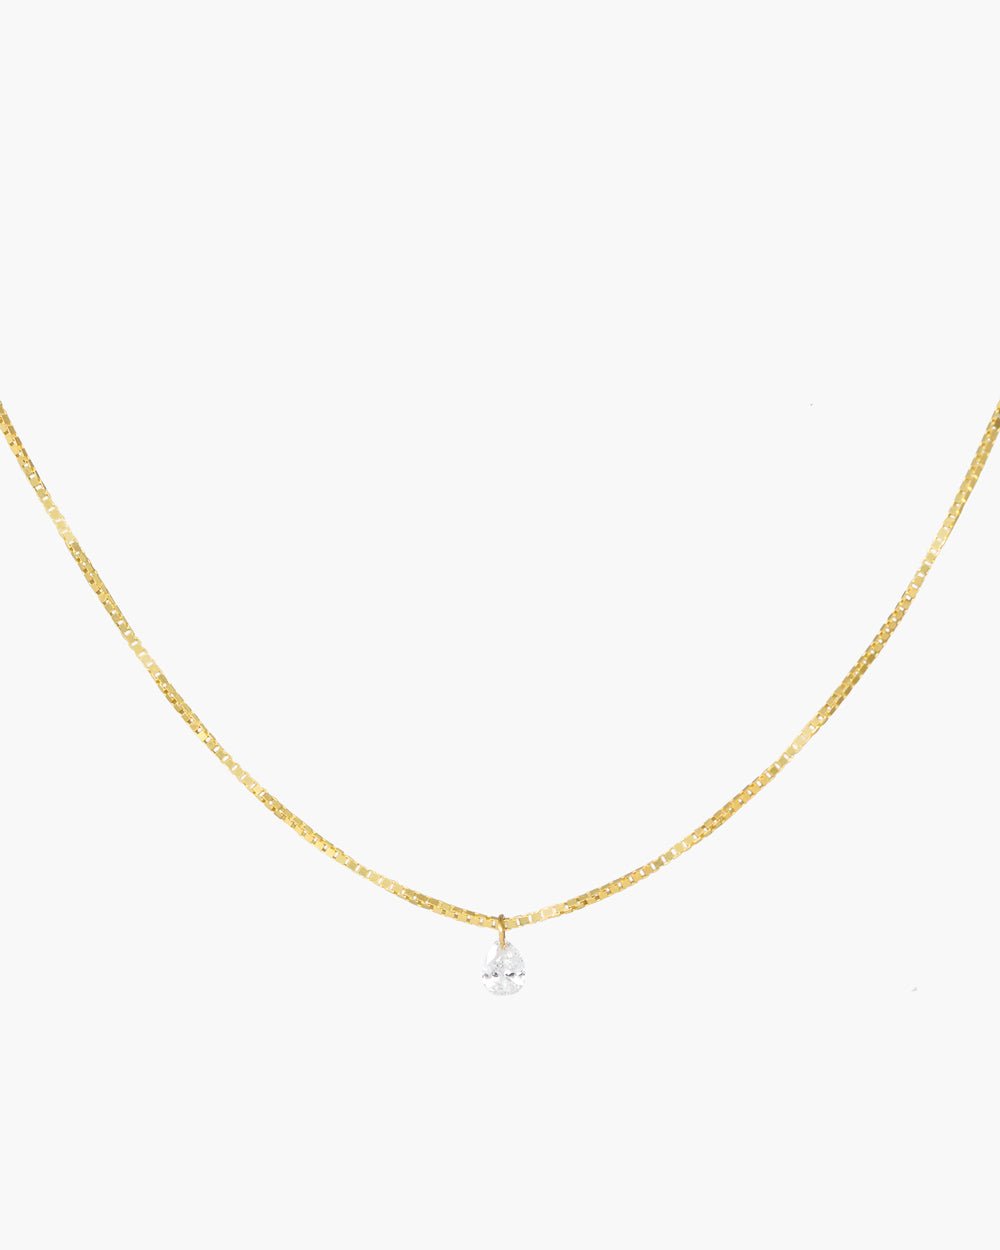 CYPRESS BOX CHAIN FLOATING DIAMOND NECKLACE - Shop Cupcakes and Cashmere